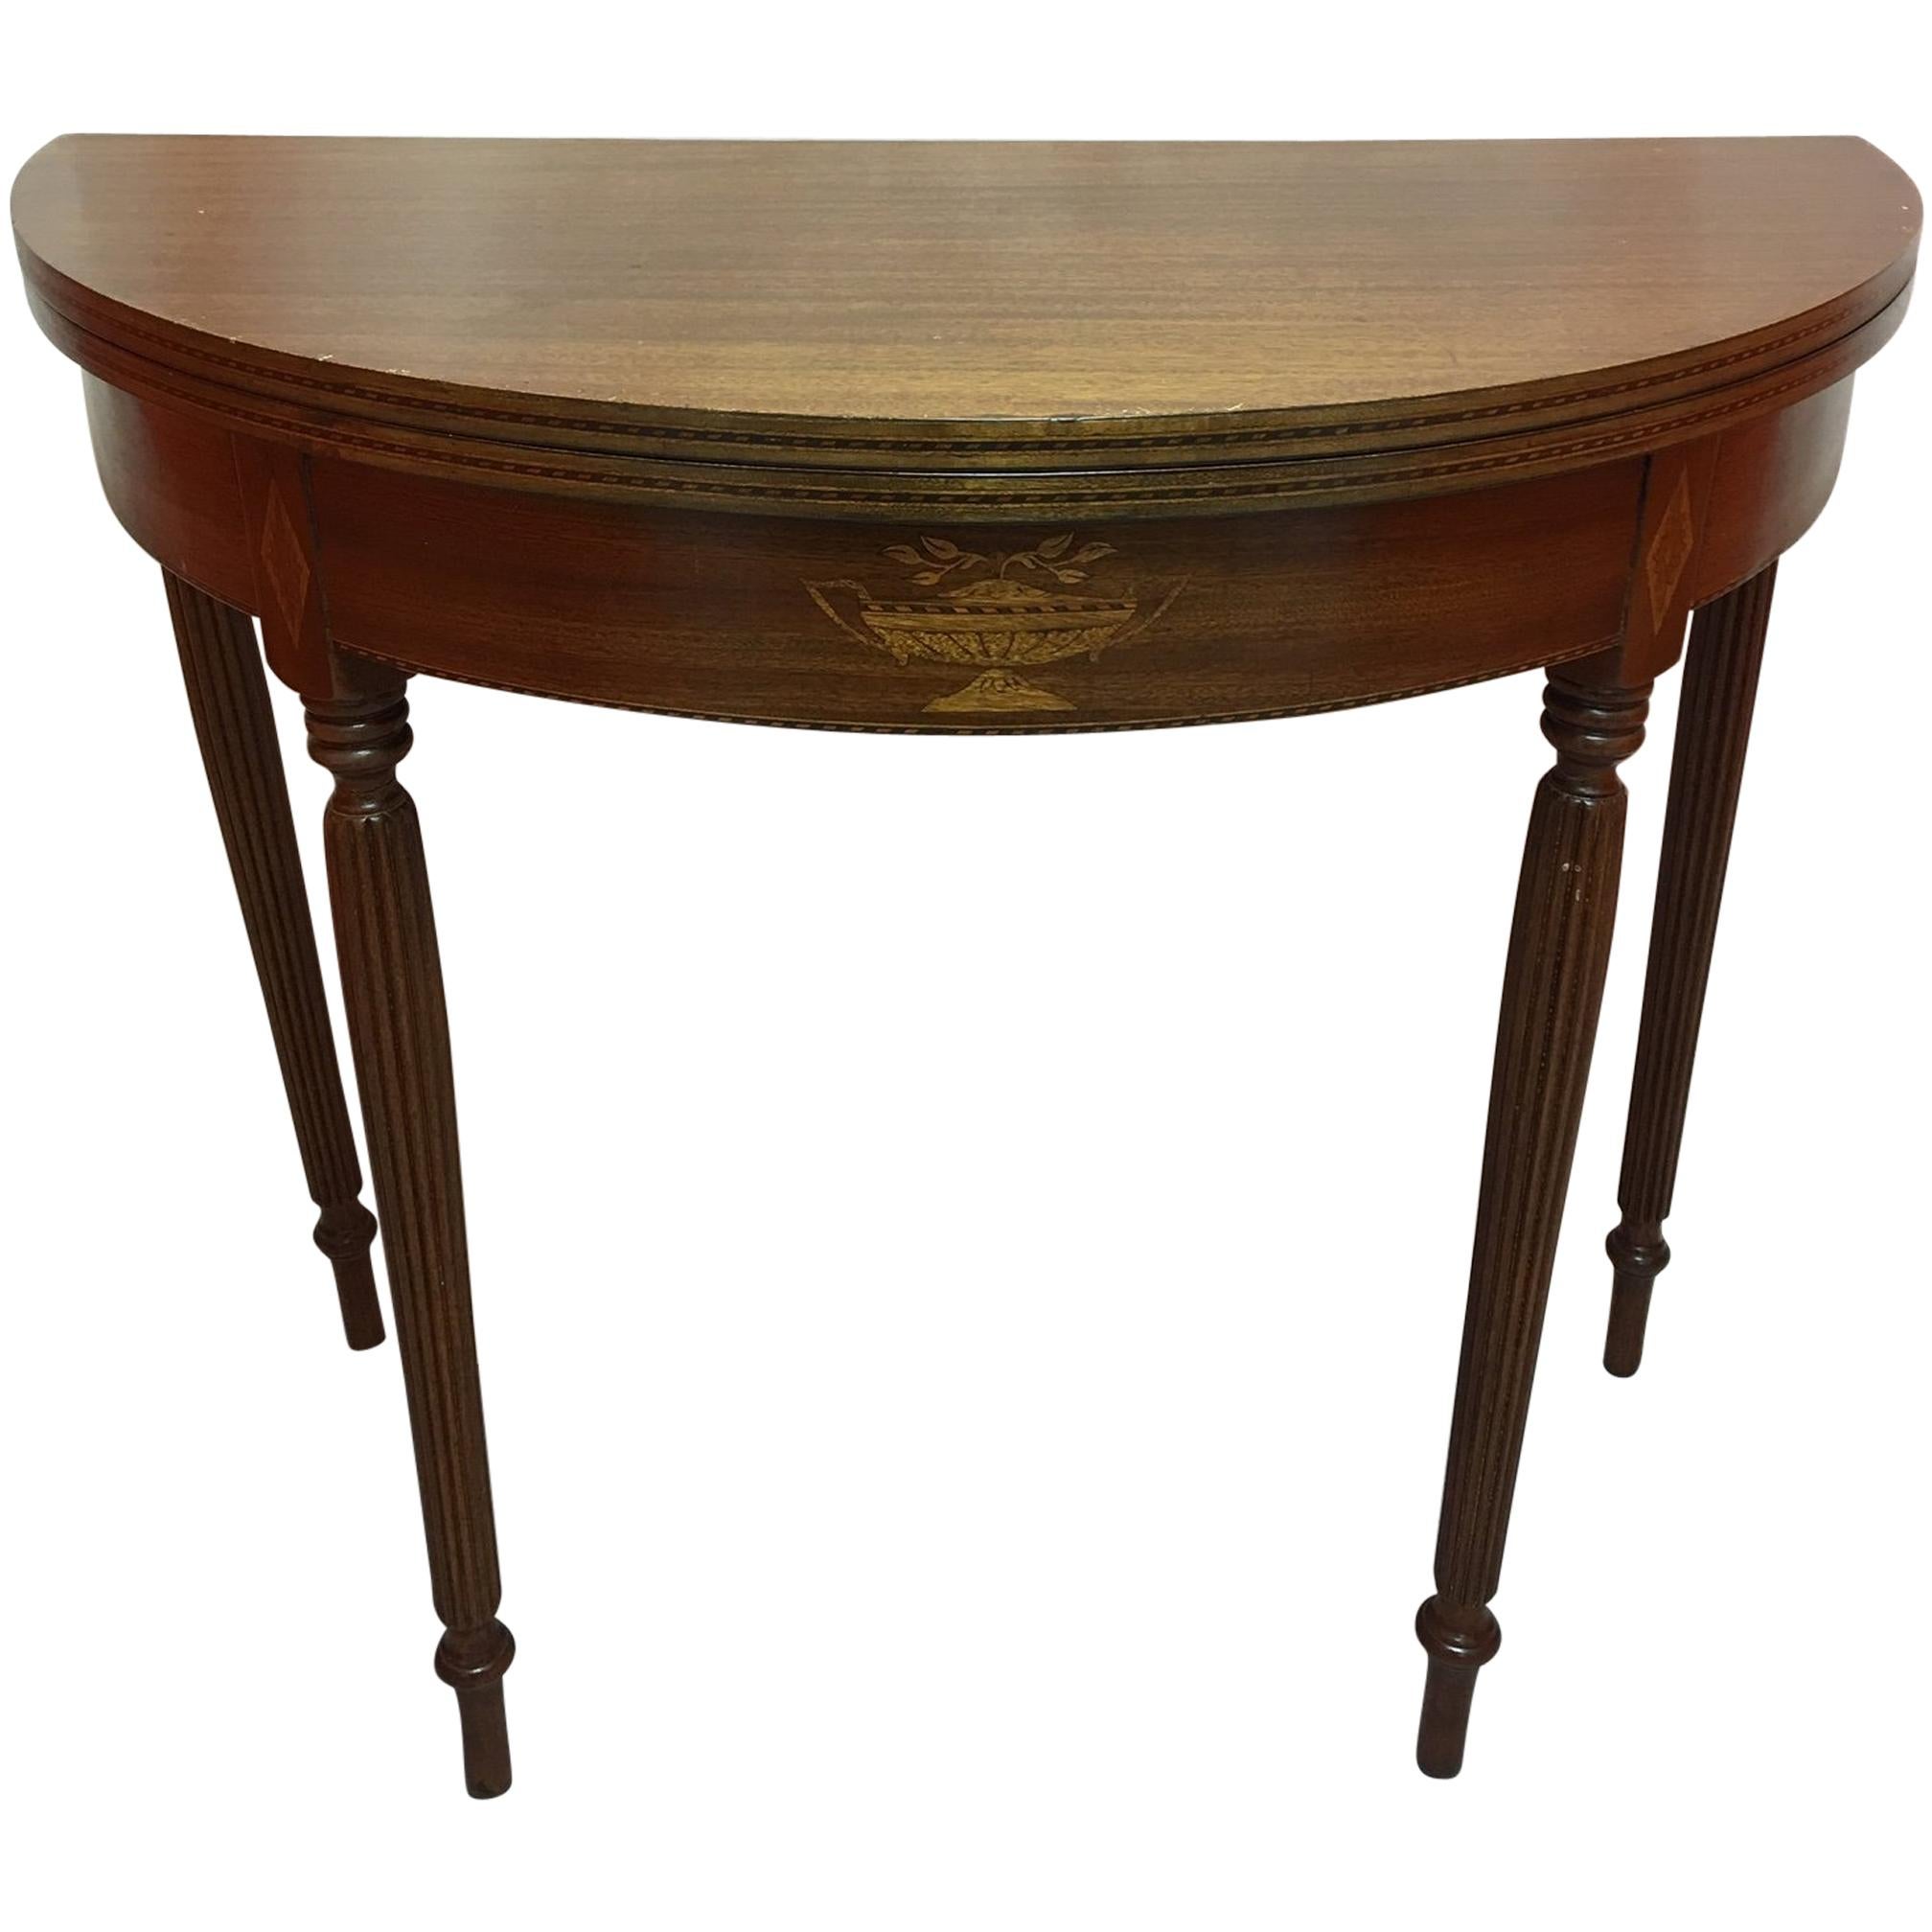 English Mahogany Demilune Table or Center Table, 19th Century